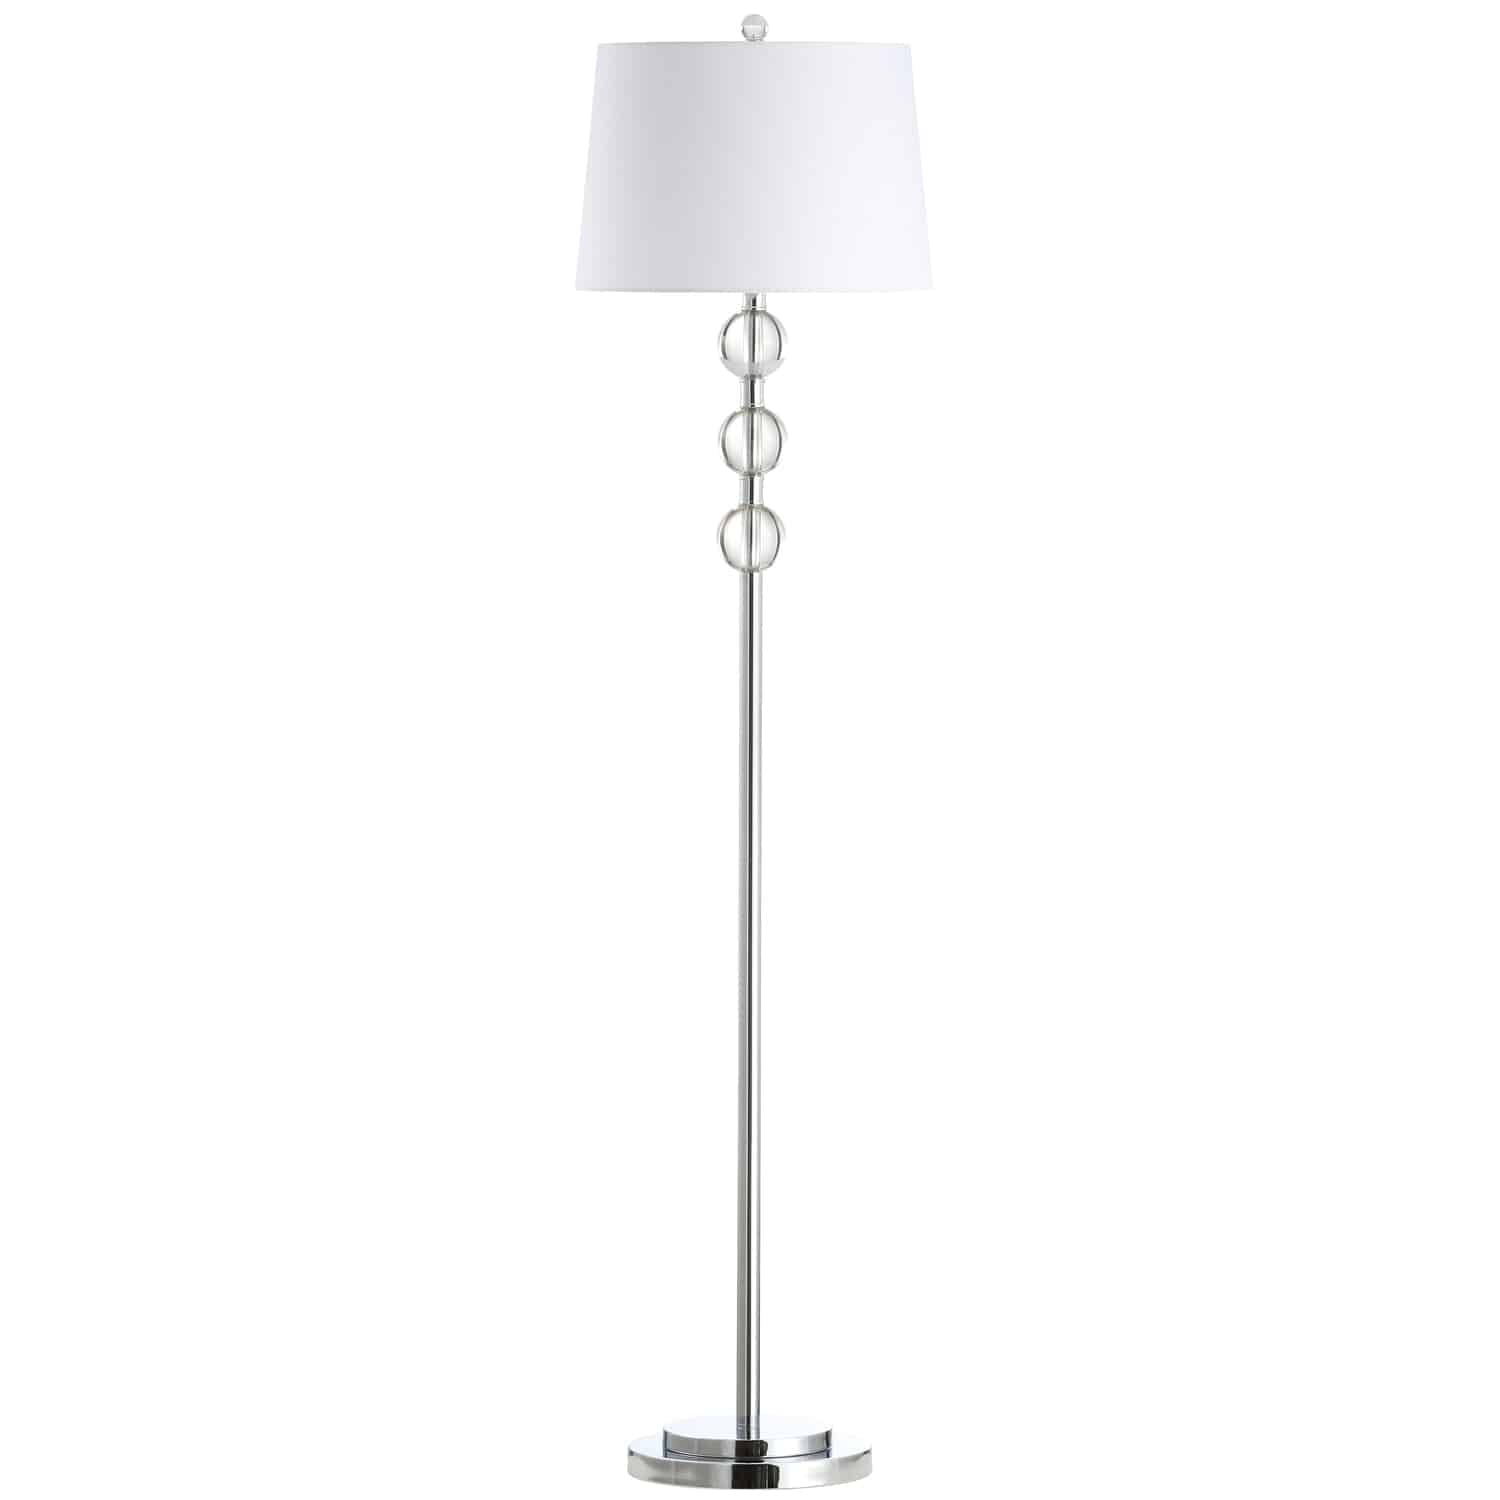 1 Light Incandescent Crystal Floor Lamp, Polished Chrome with White Shade